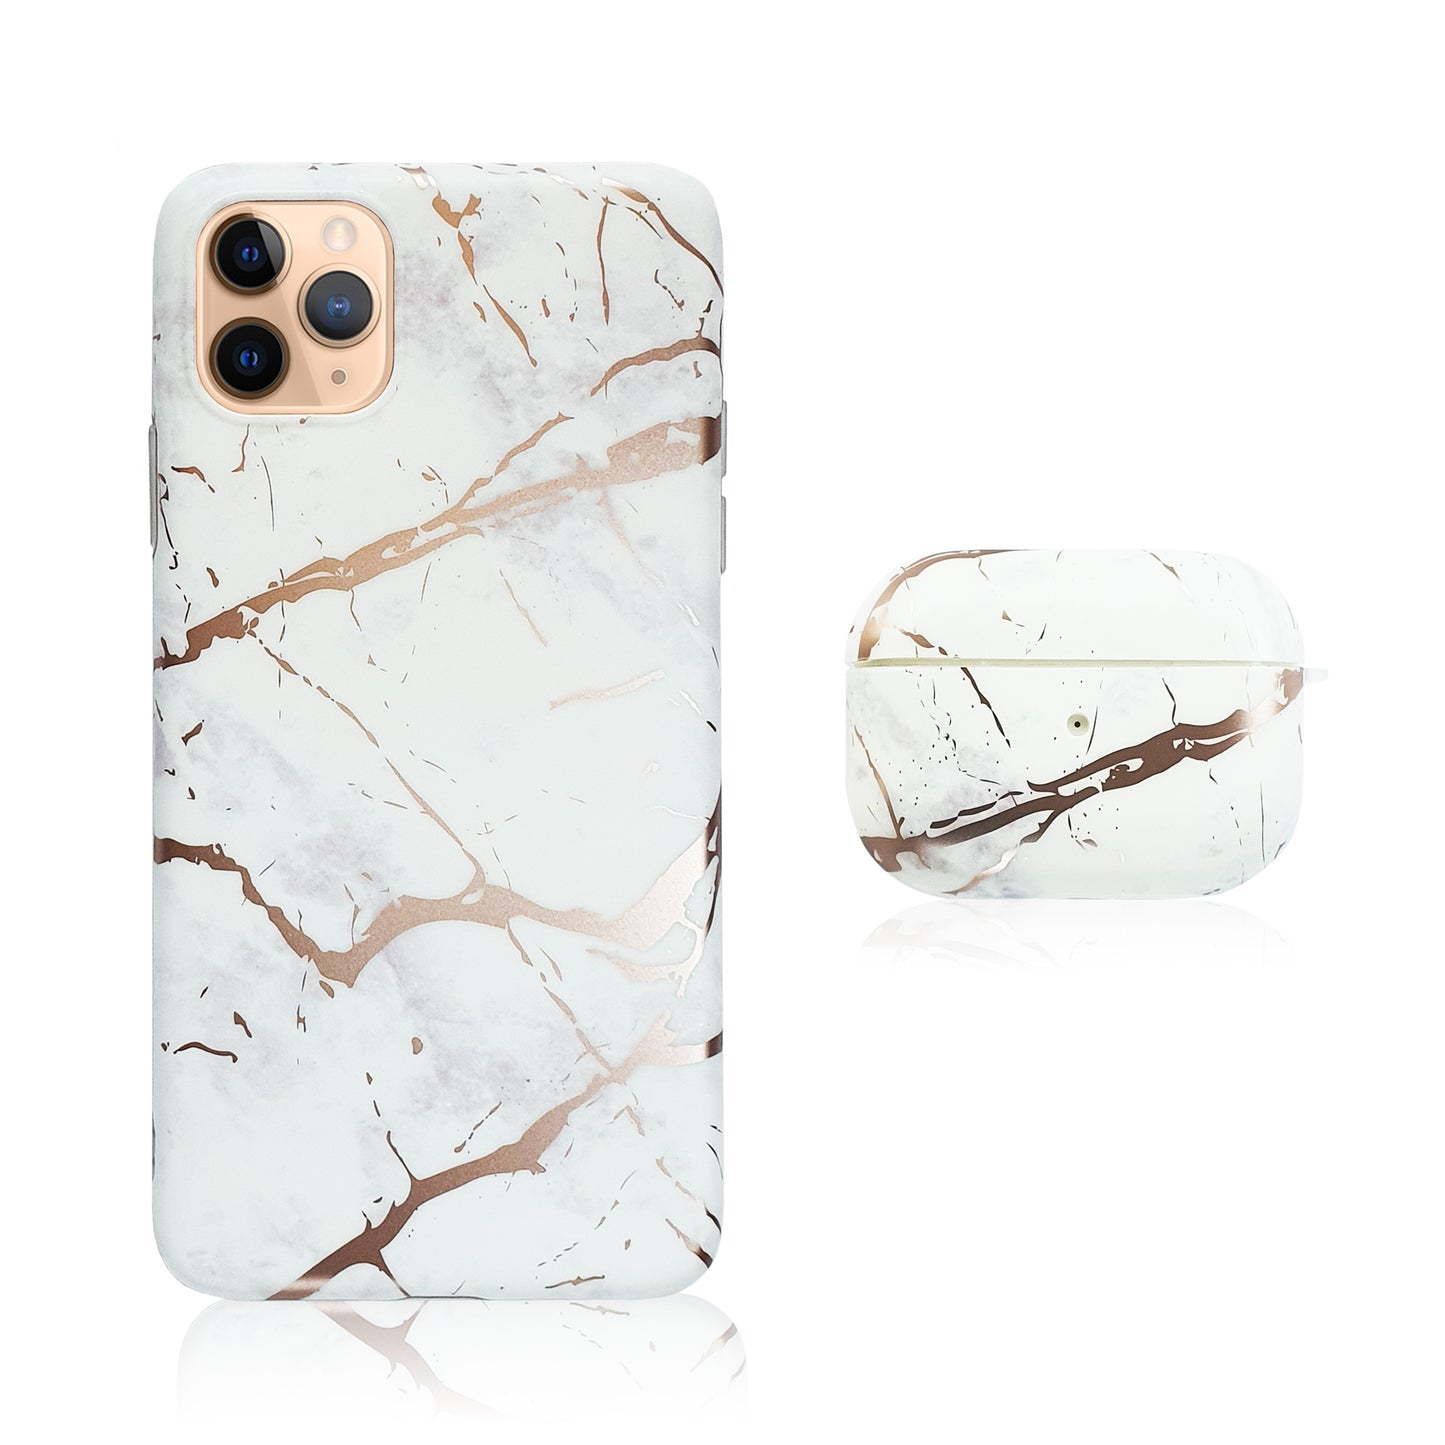 White and Gold Silicon iPhone Case with AirPods Pro